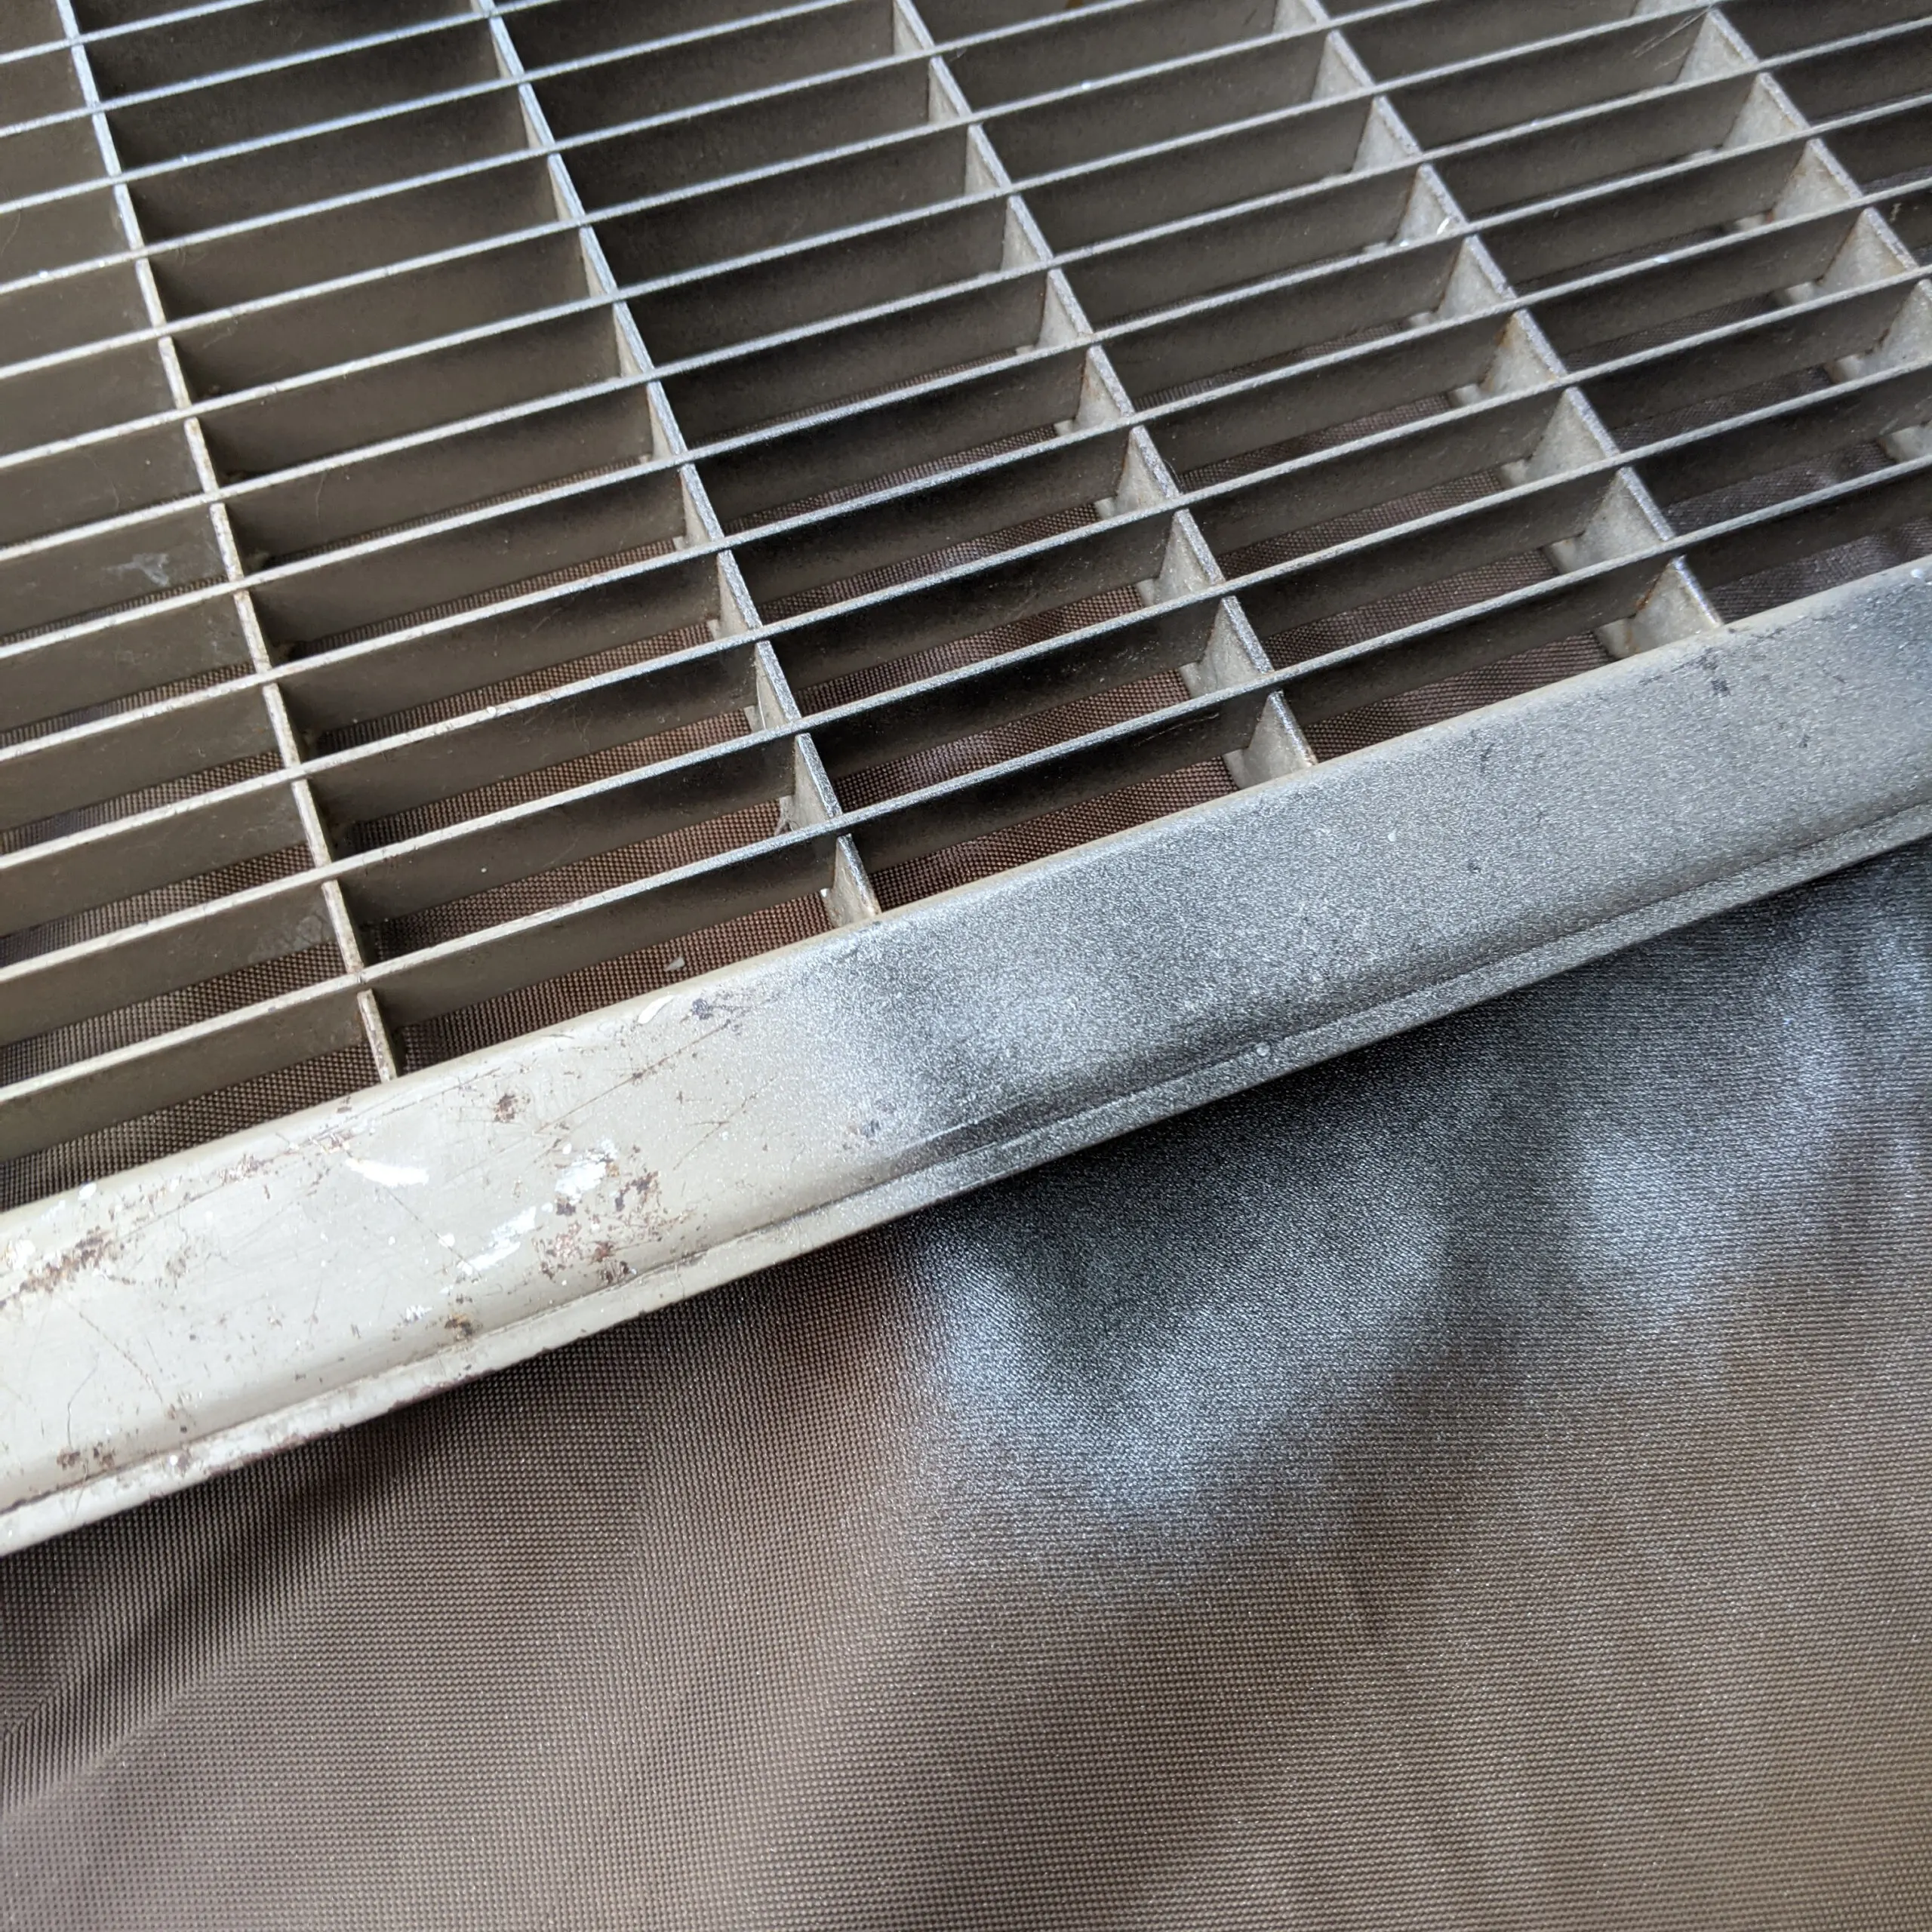 painting heat vent grills with light coats of metallic paint.